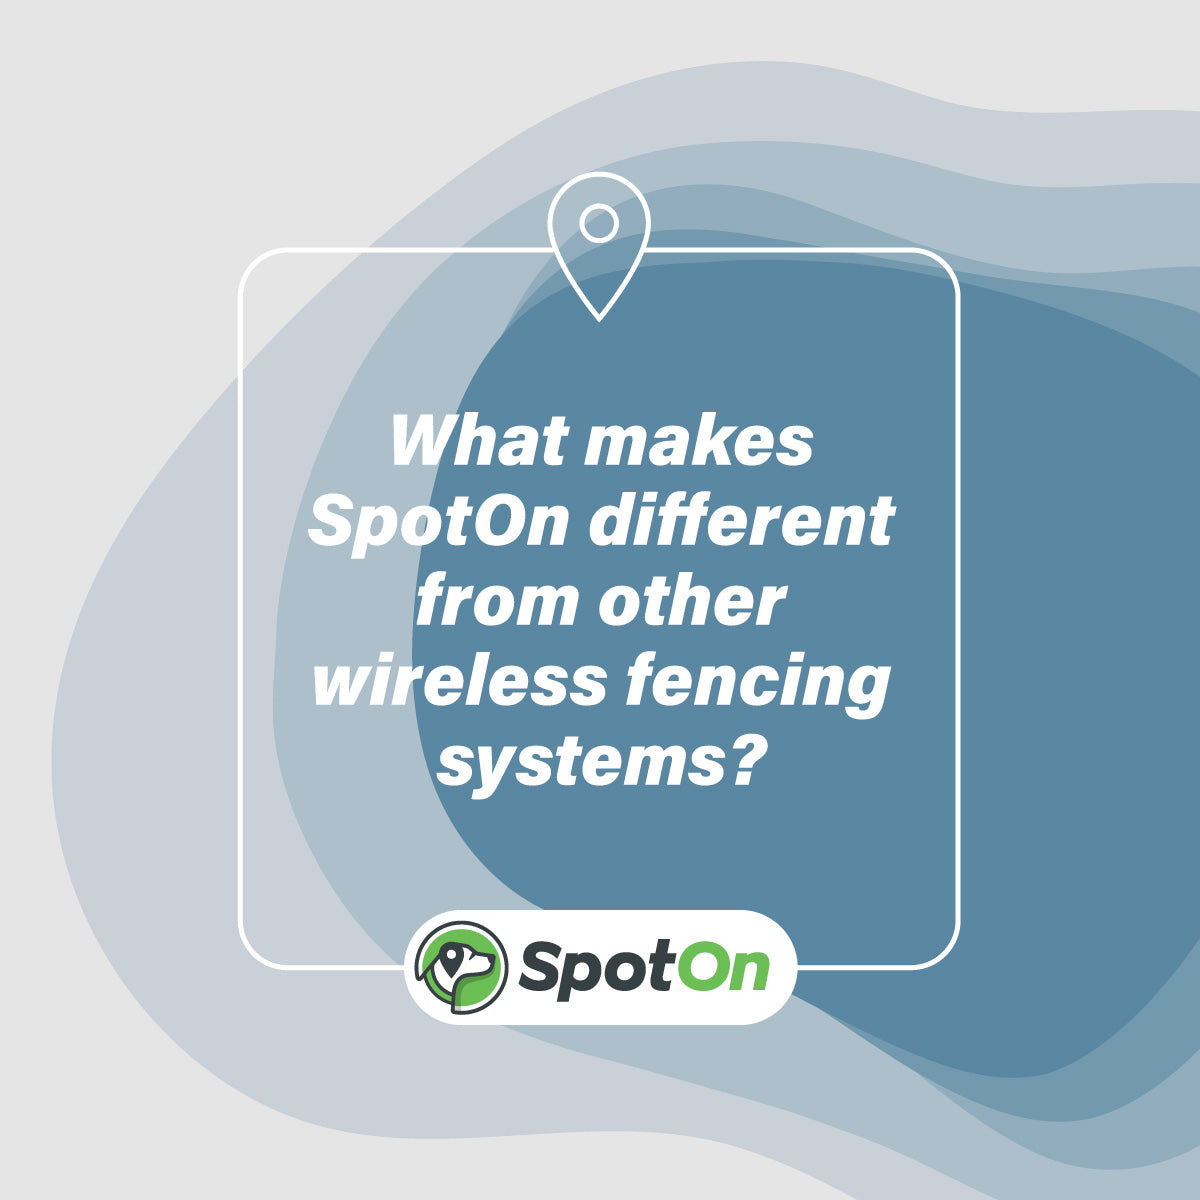 What makes SpotOn different from other wireless fencing systems?